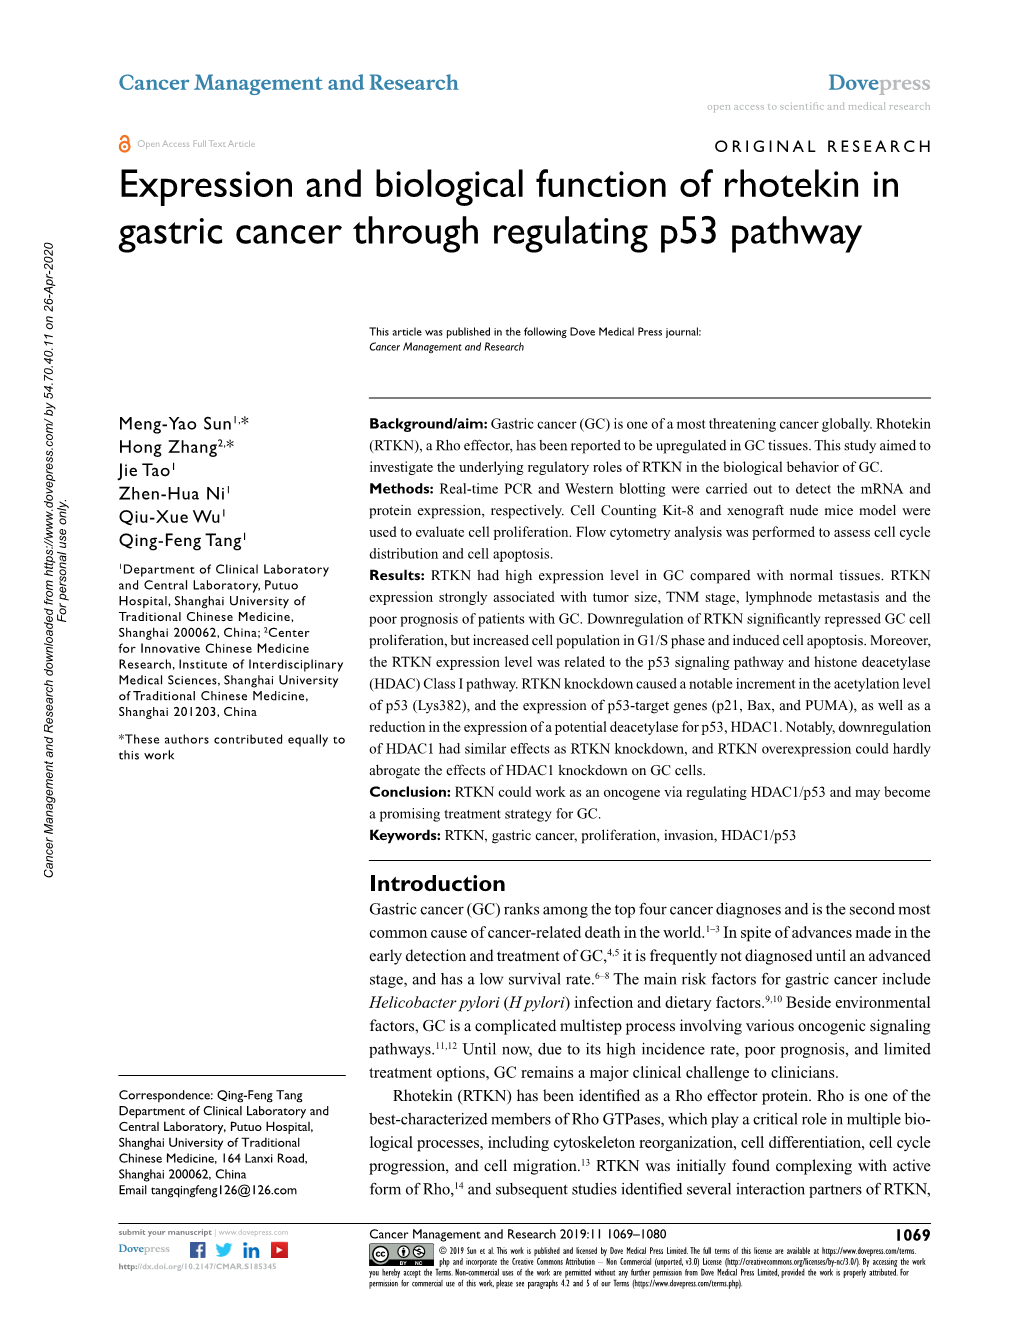 Expression and Biological Function of Rhotekin in Gastric Cancer Through Regulating P53 Pathway